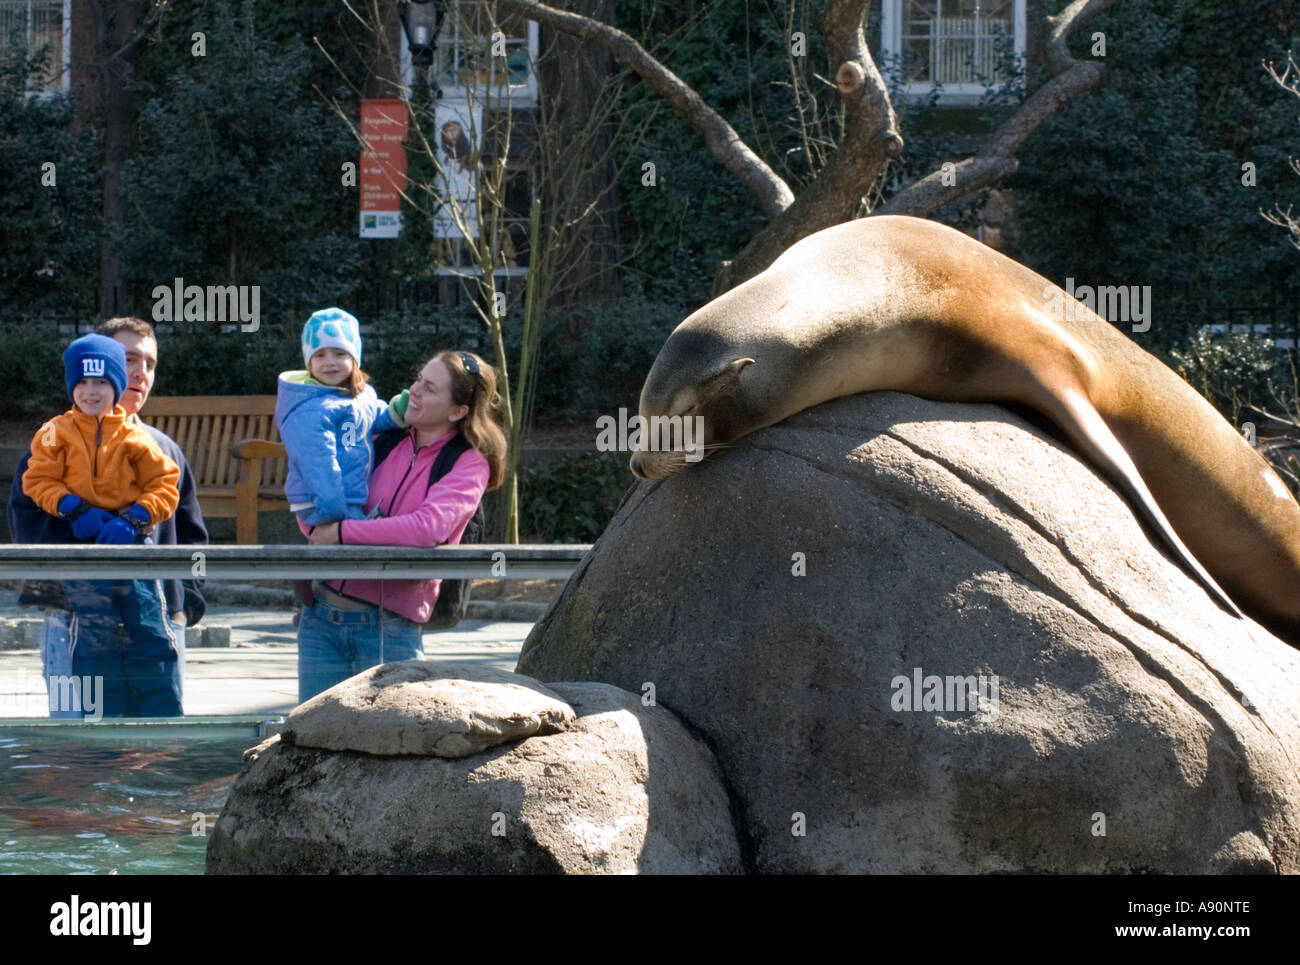 Family Watching a Sea Lion at the Central Park Zoo Stock Photo